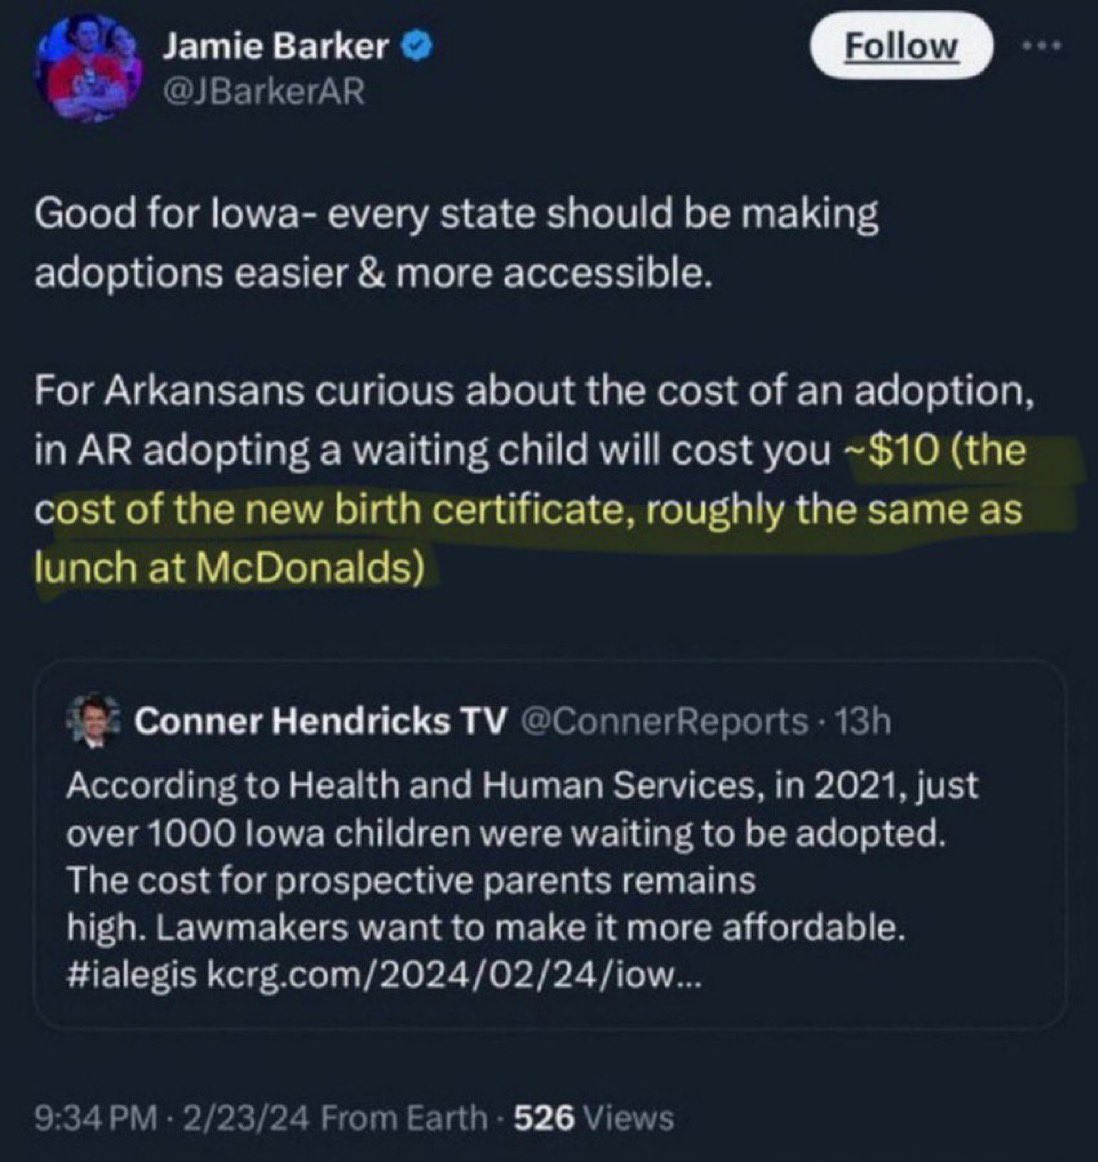 Remember when Sarah Sanders Deputy Chief of Staff, @JBarkerAR, posted that you can get yourself a child for [checks notes] the cost of lunch at McDonald’s. #wtf